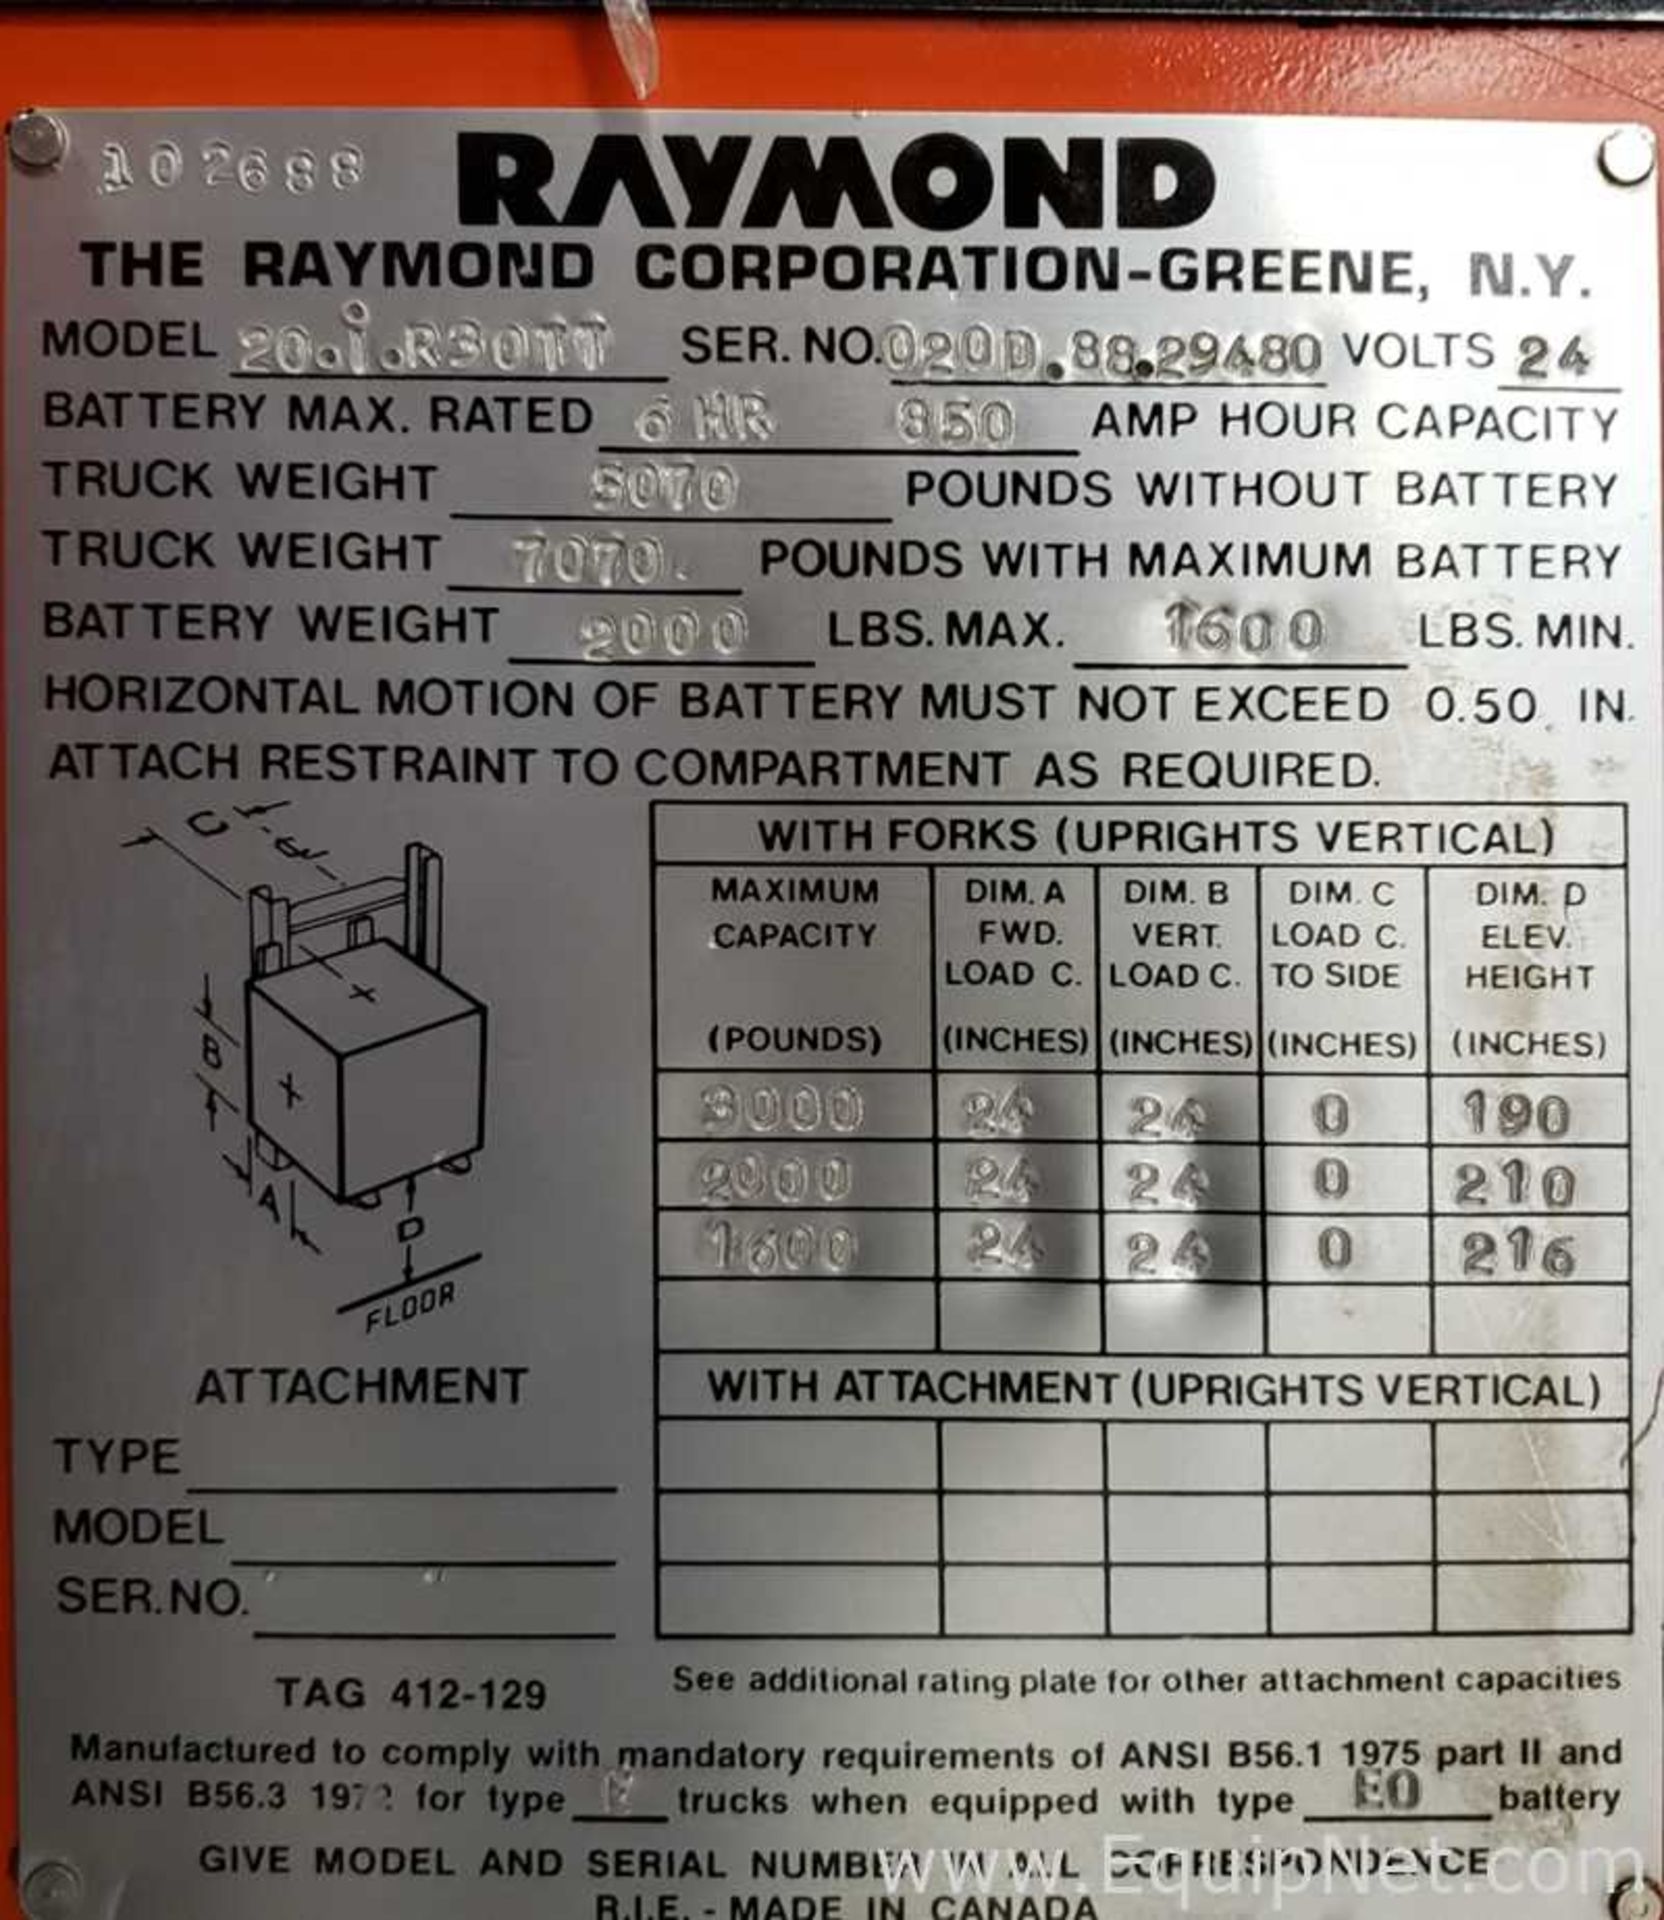 Raymond 20.1.R3011 Battery Operated Fork Lift Reach Truck 24 Volts With Charger - Image 6 of 6